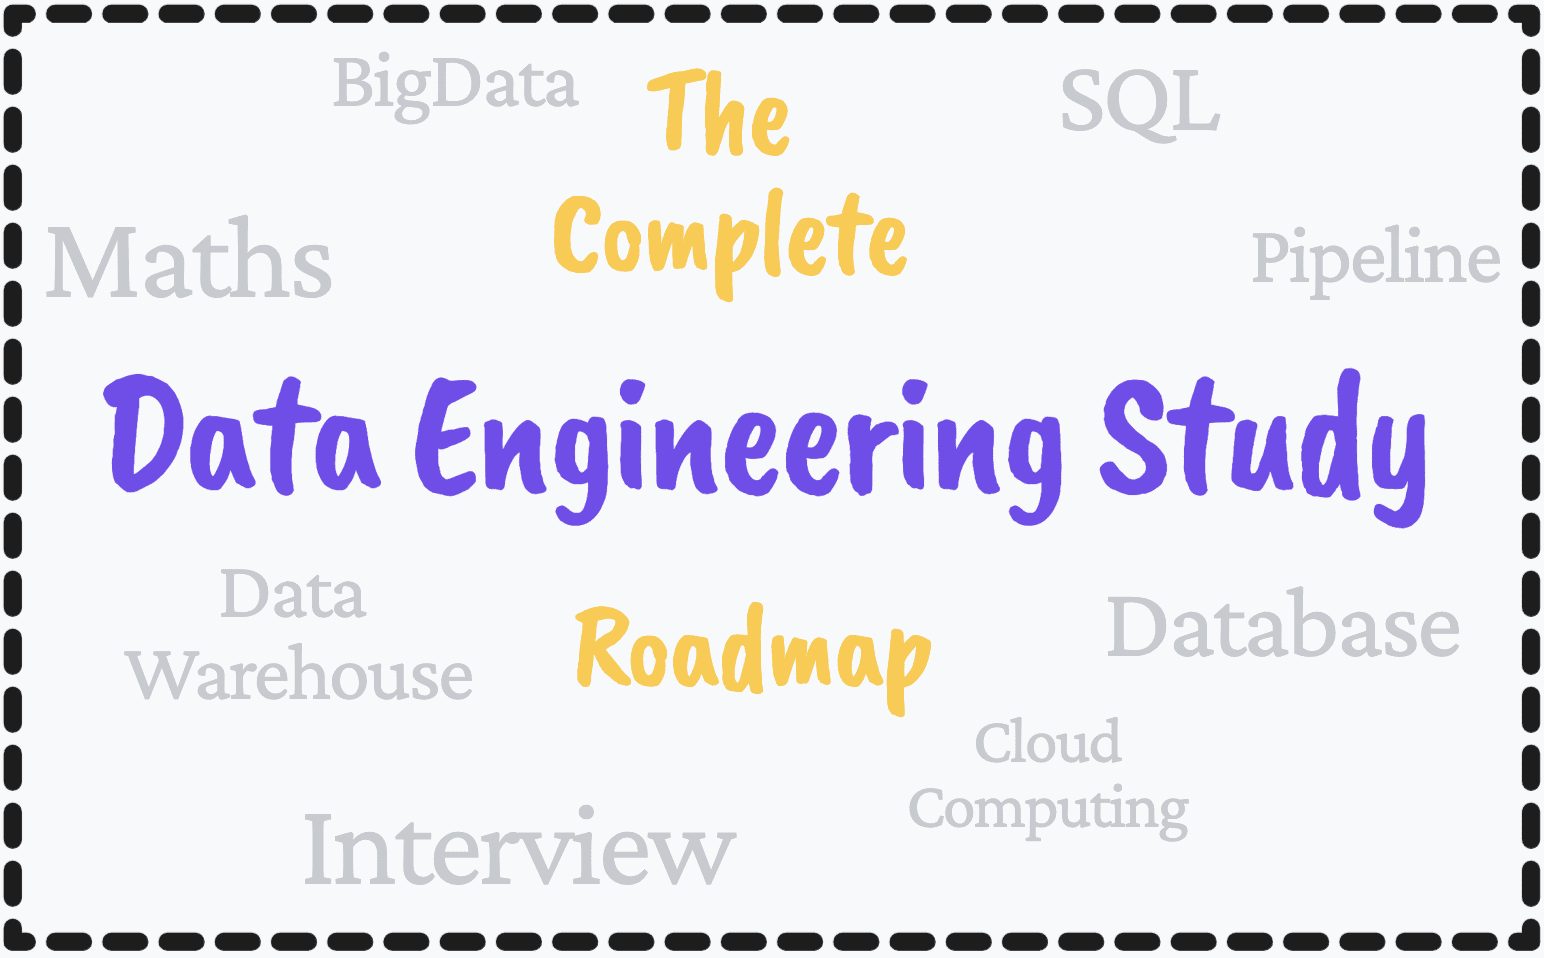 The Complete Data Engineering Study Roadmap